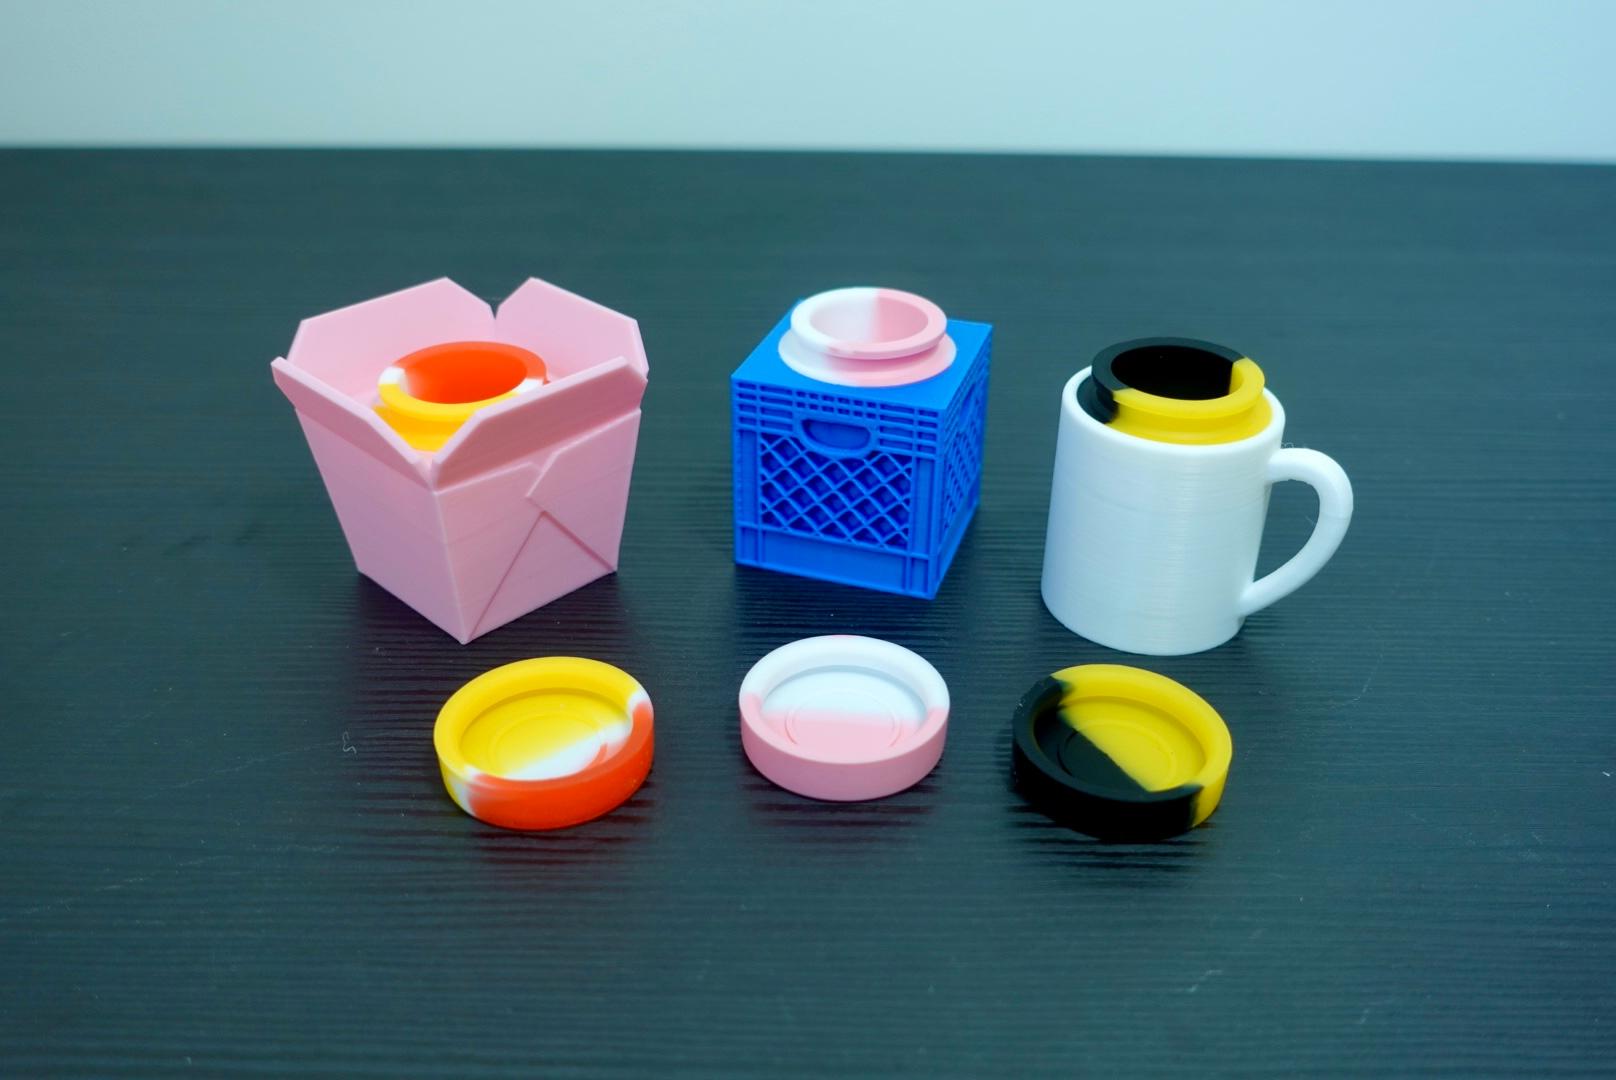 5ml Silicone Containers (Mini Crate, Takeout Box, Coffee Mug) 3d model